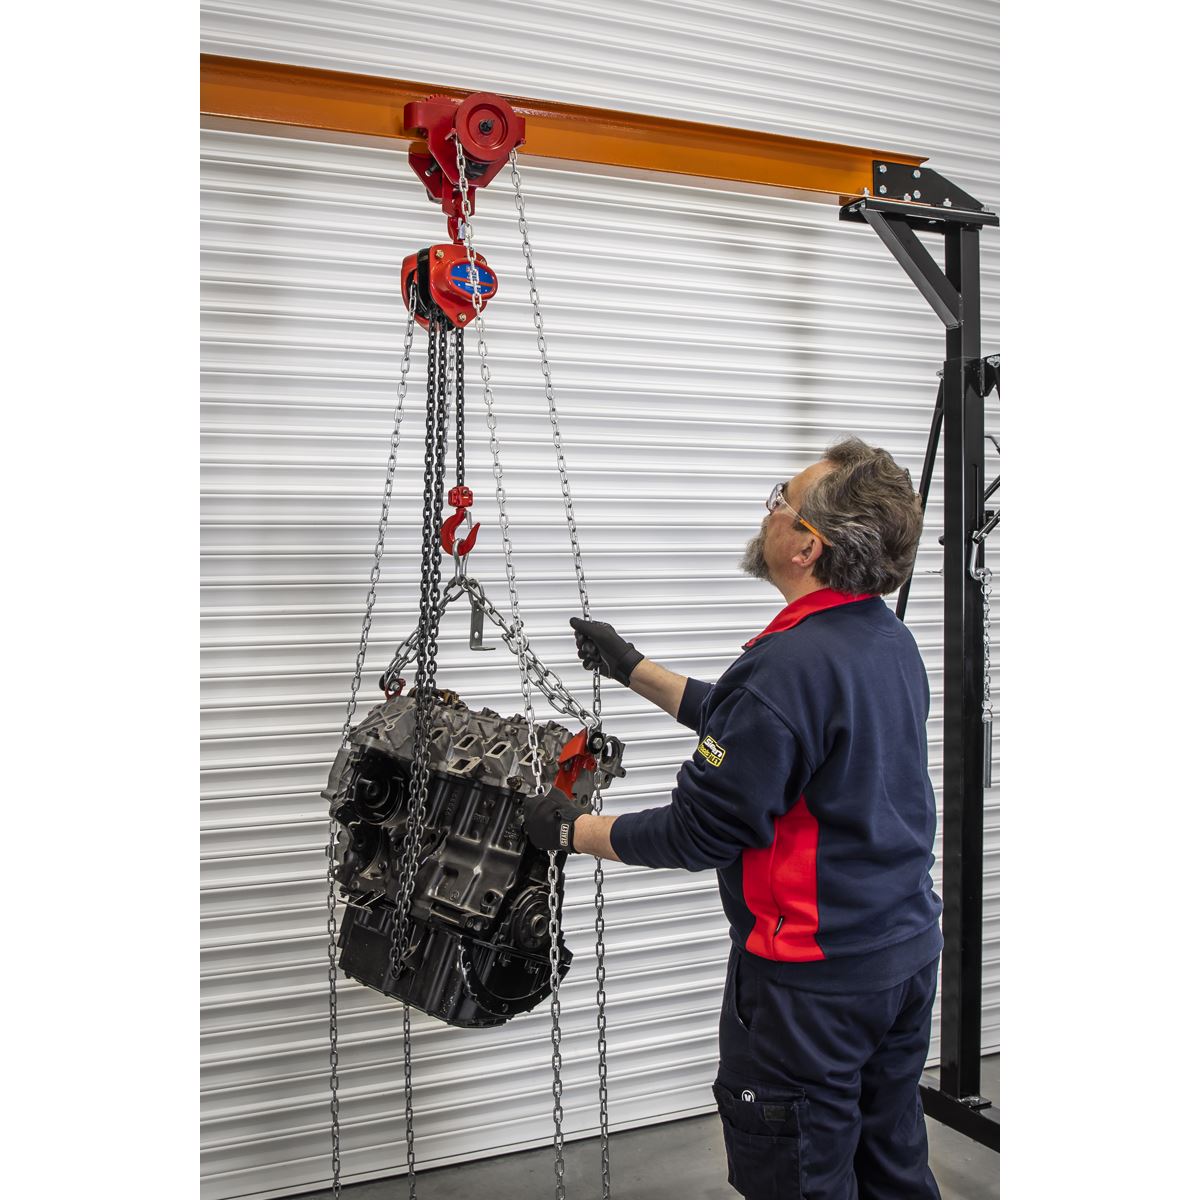 Sealey Portable Adjustable Gantry Crane with Geared Trolley Combo 1 Tonne